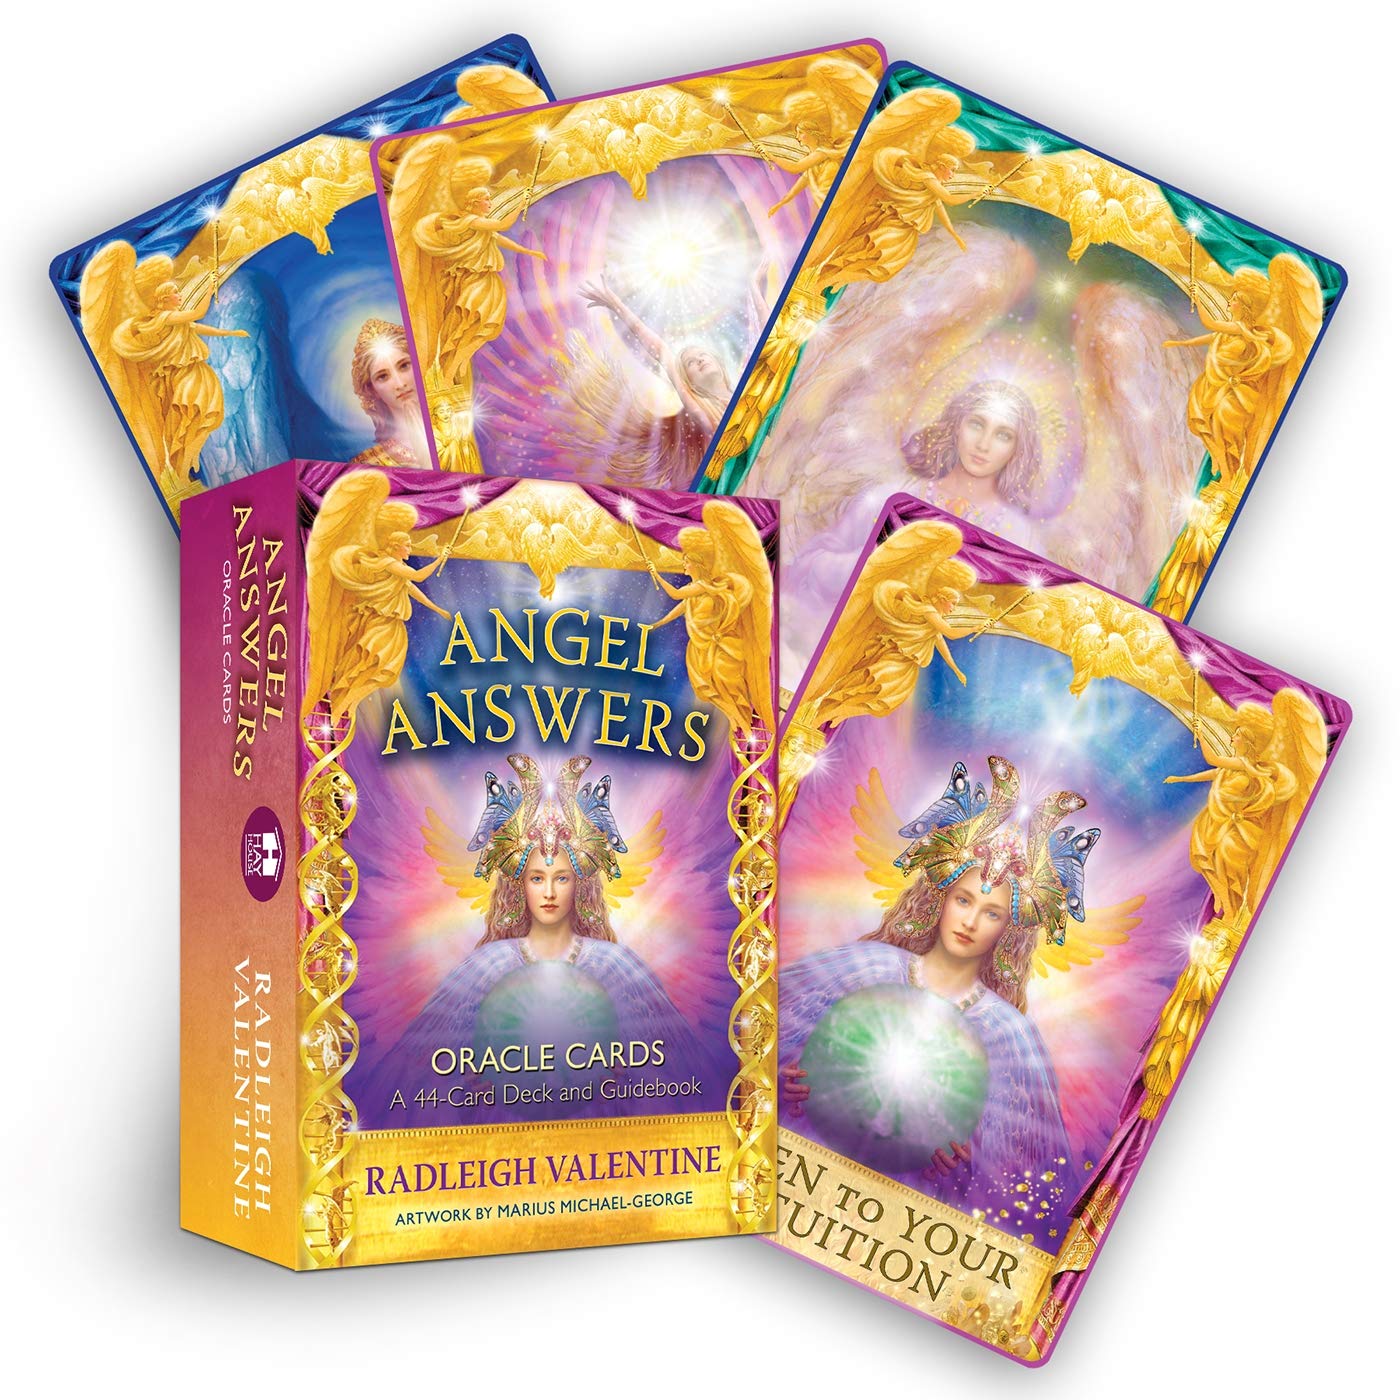 Angel Answers Oracle Cards: A 44-Card Deck and Guidebook || Radleigh Valentine